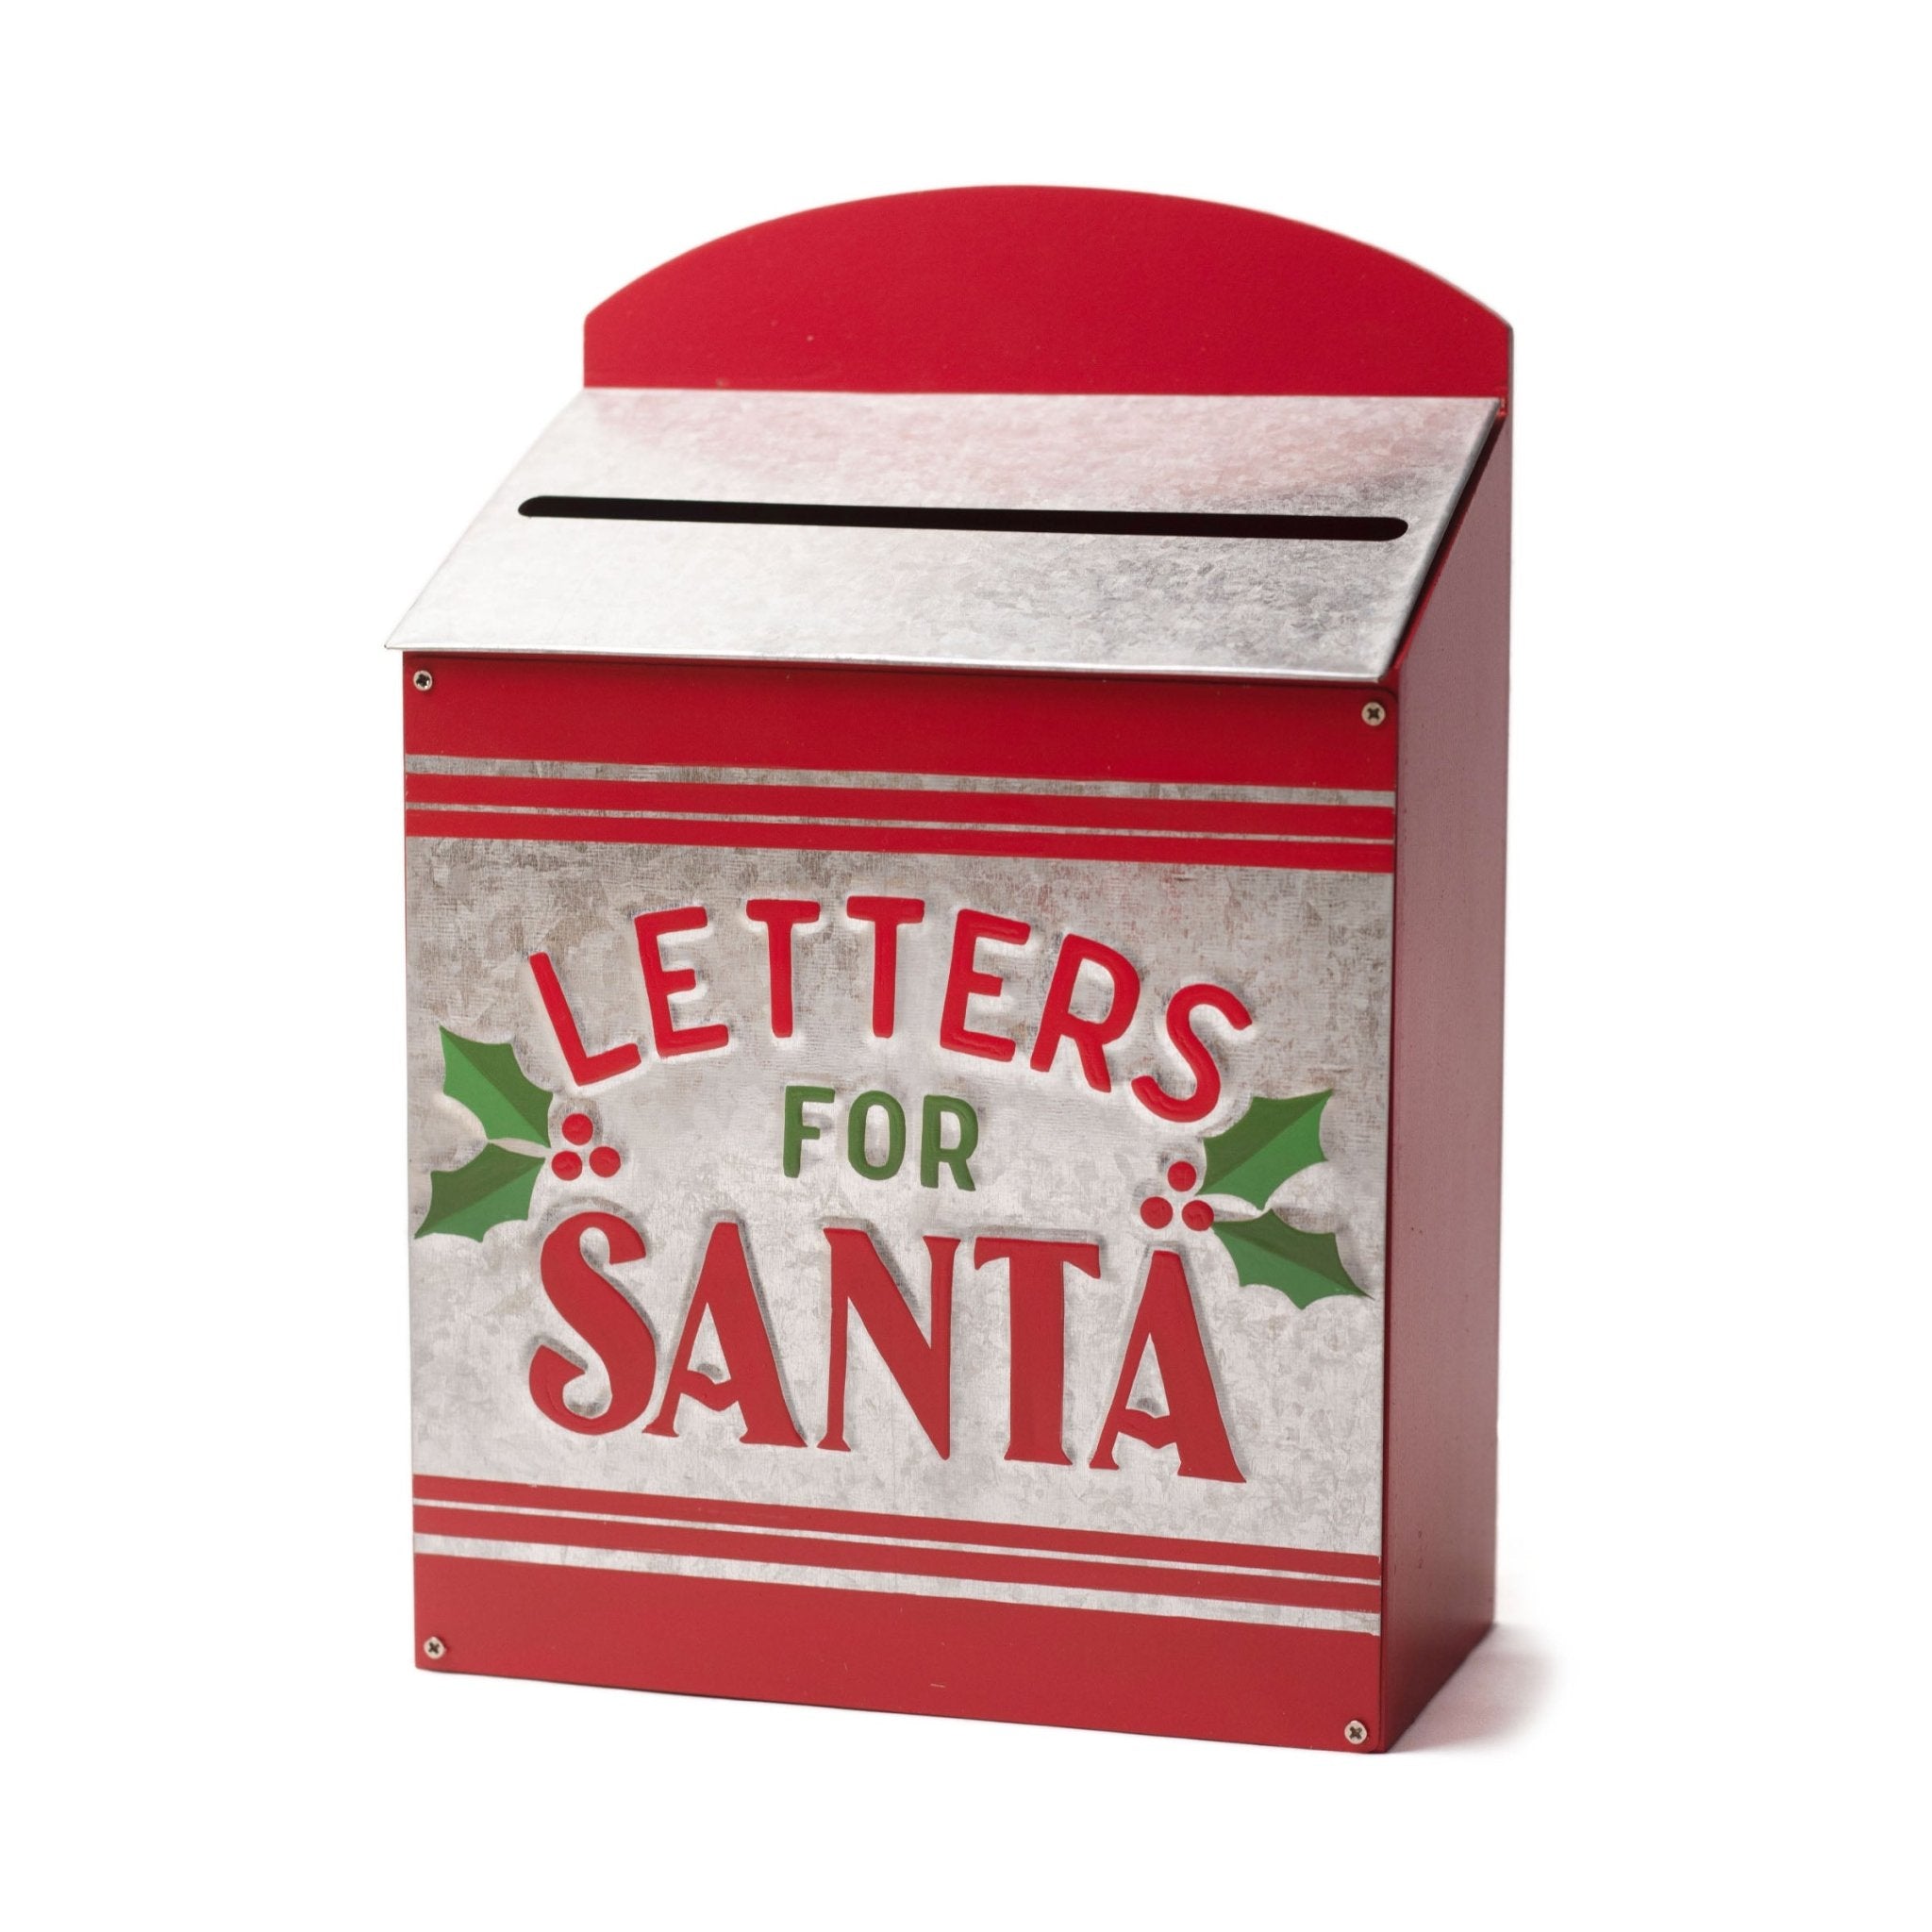 New Hearth & Hand Painted Metal 'Letters To Santa' Mailbox Bronze  8.5x5.5x8 - Helia Beer Co